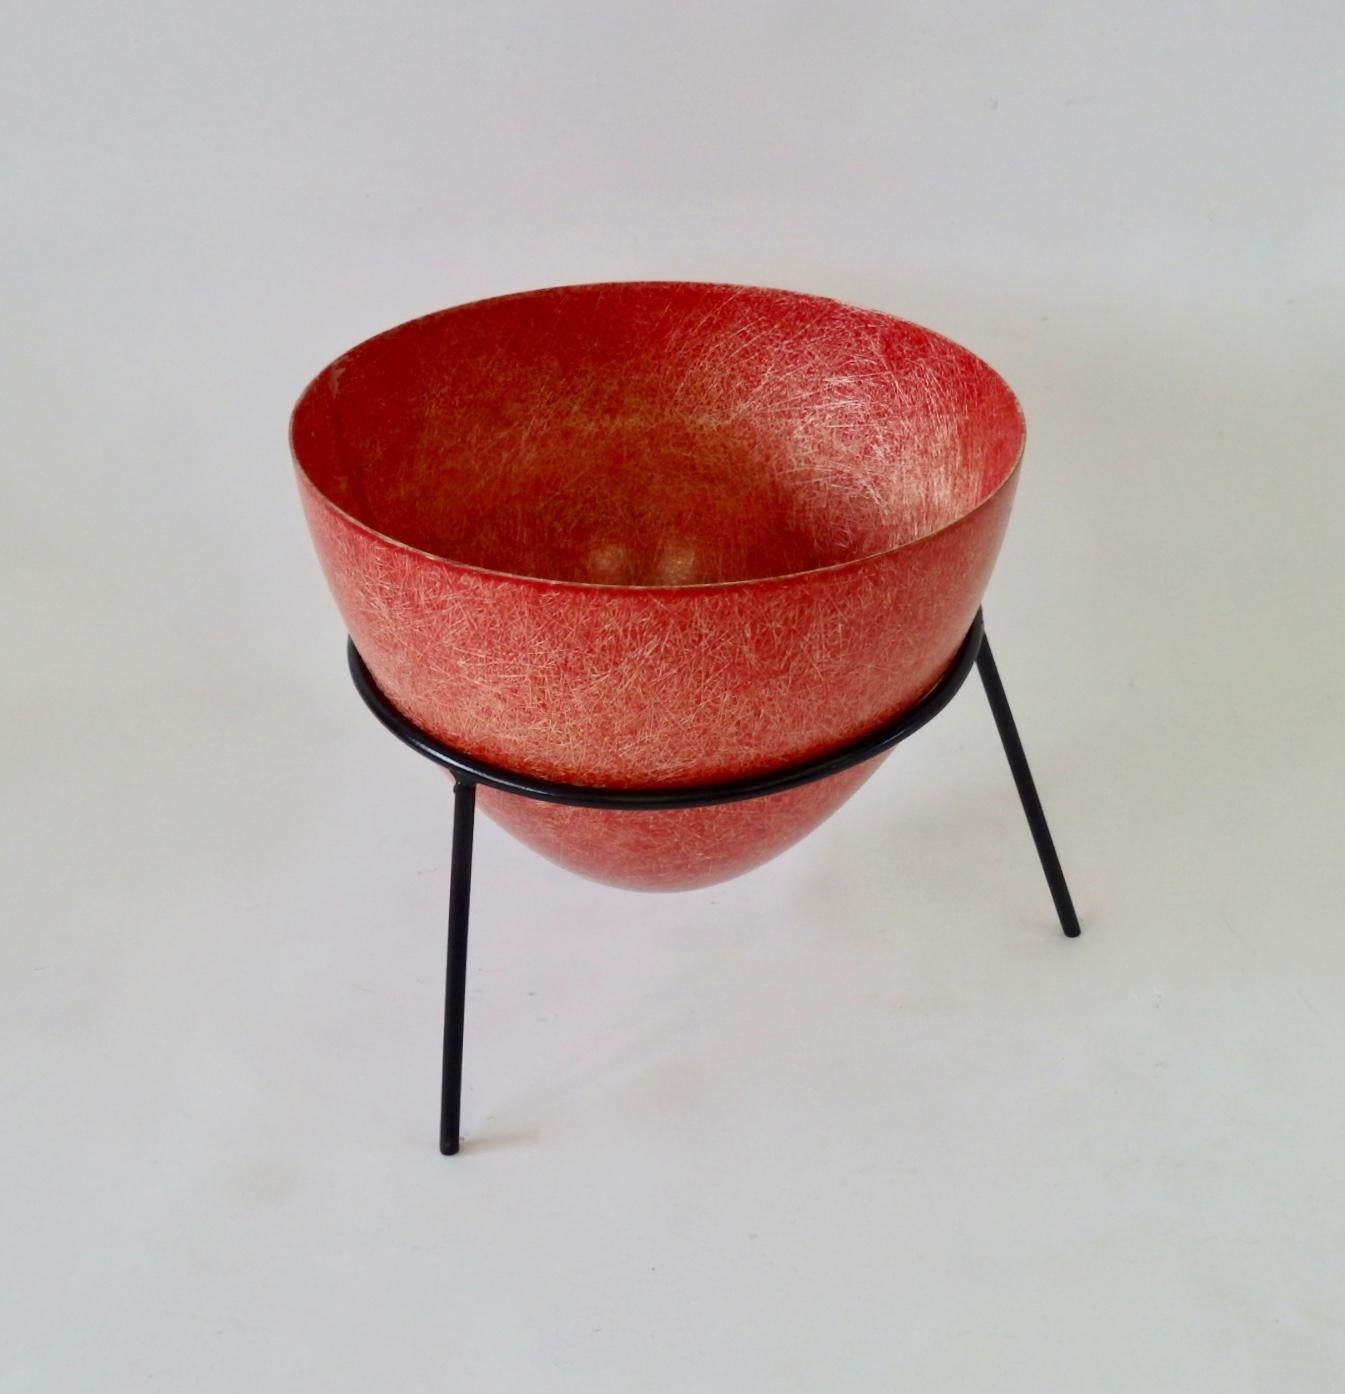 Nicely grained Greta Grossman style red fiberglass planter pot in wrought iron stand. Marked Kimball Mfg. Corp, San Francisco.